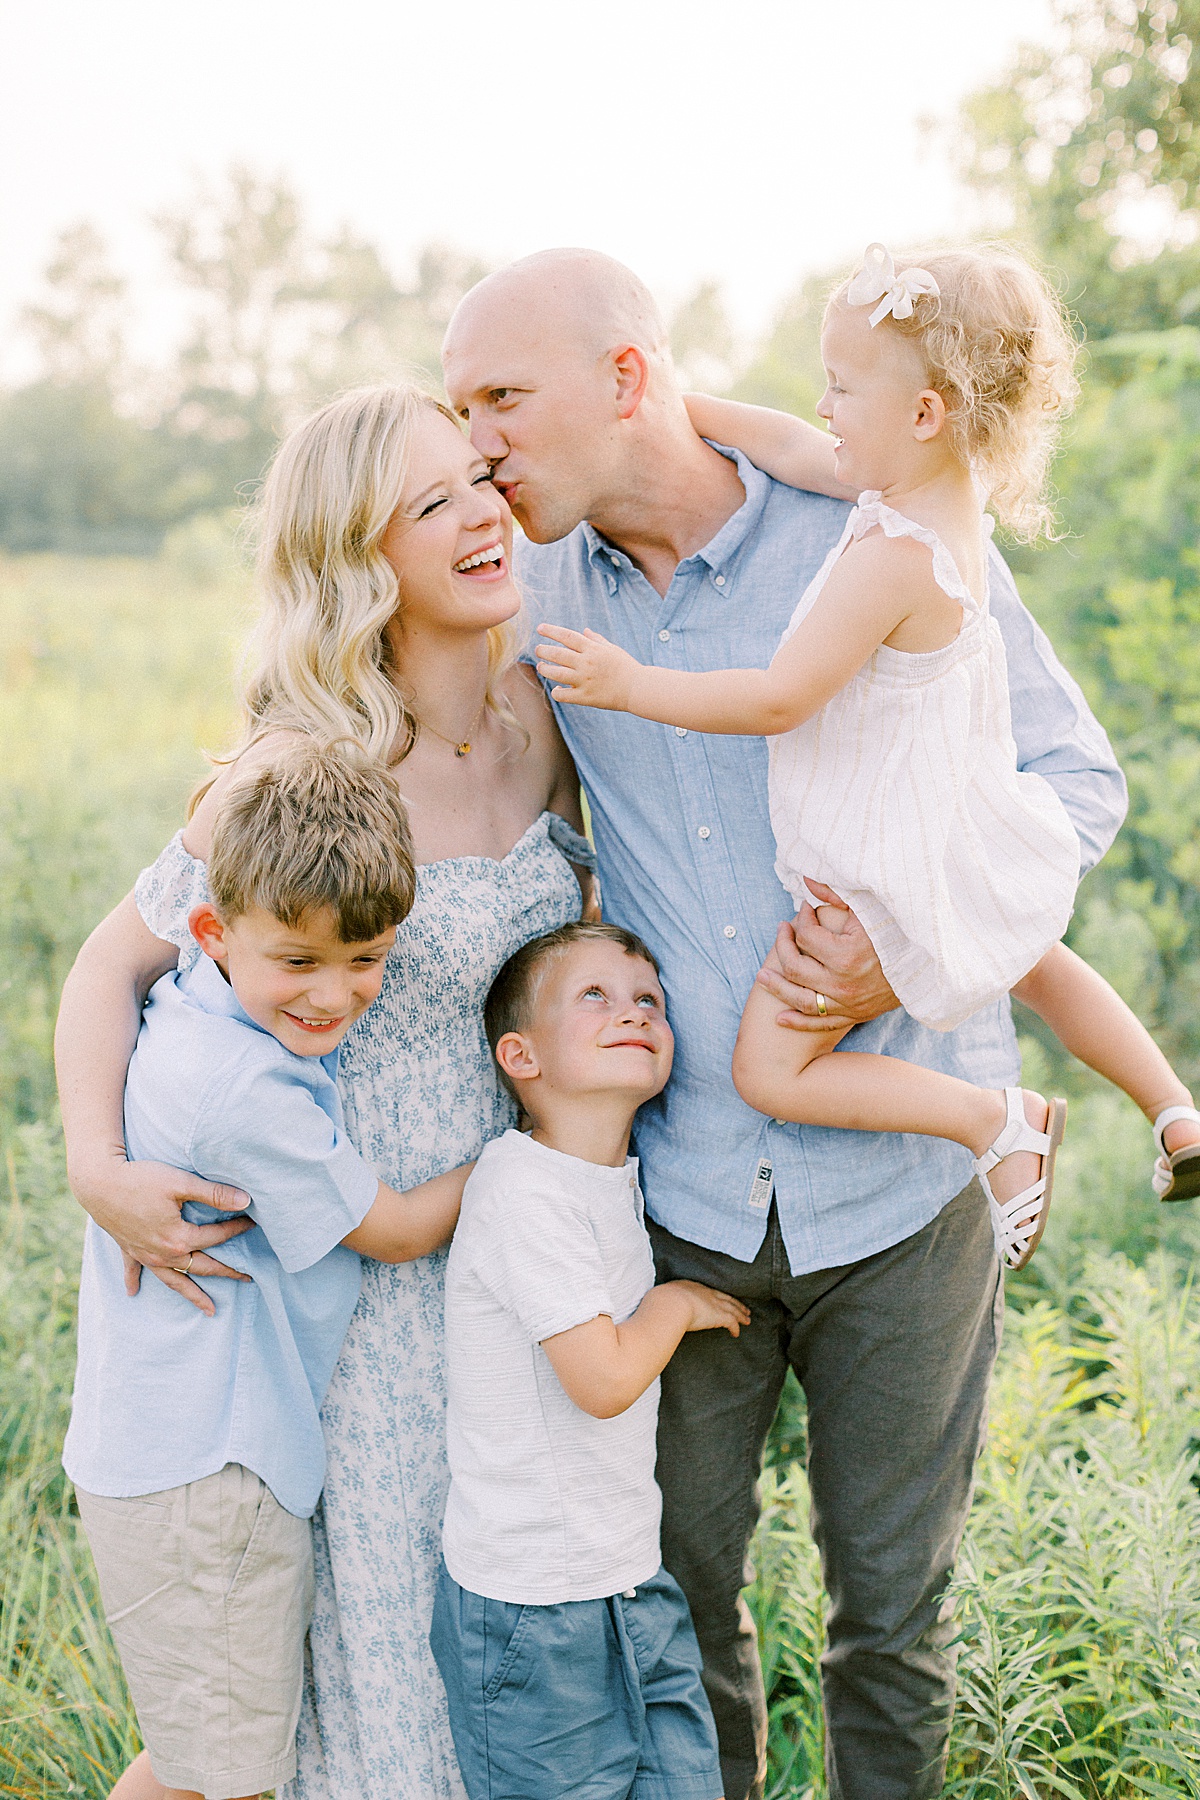 Carmel, Indiana family poses in a field for a photo by Katelyn Ng Photography.